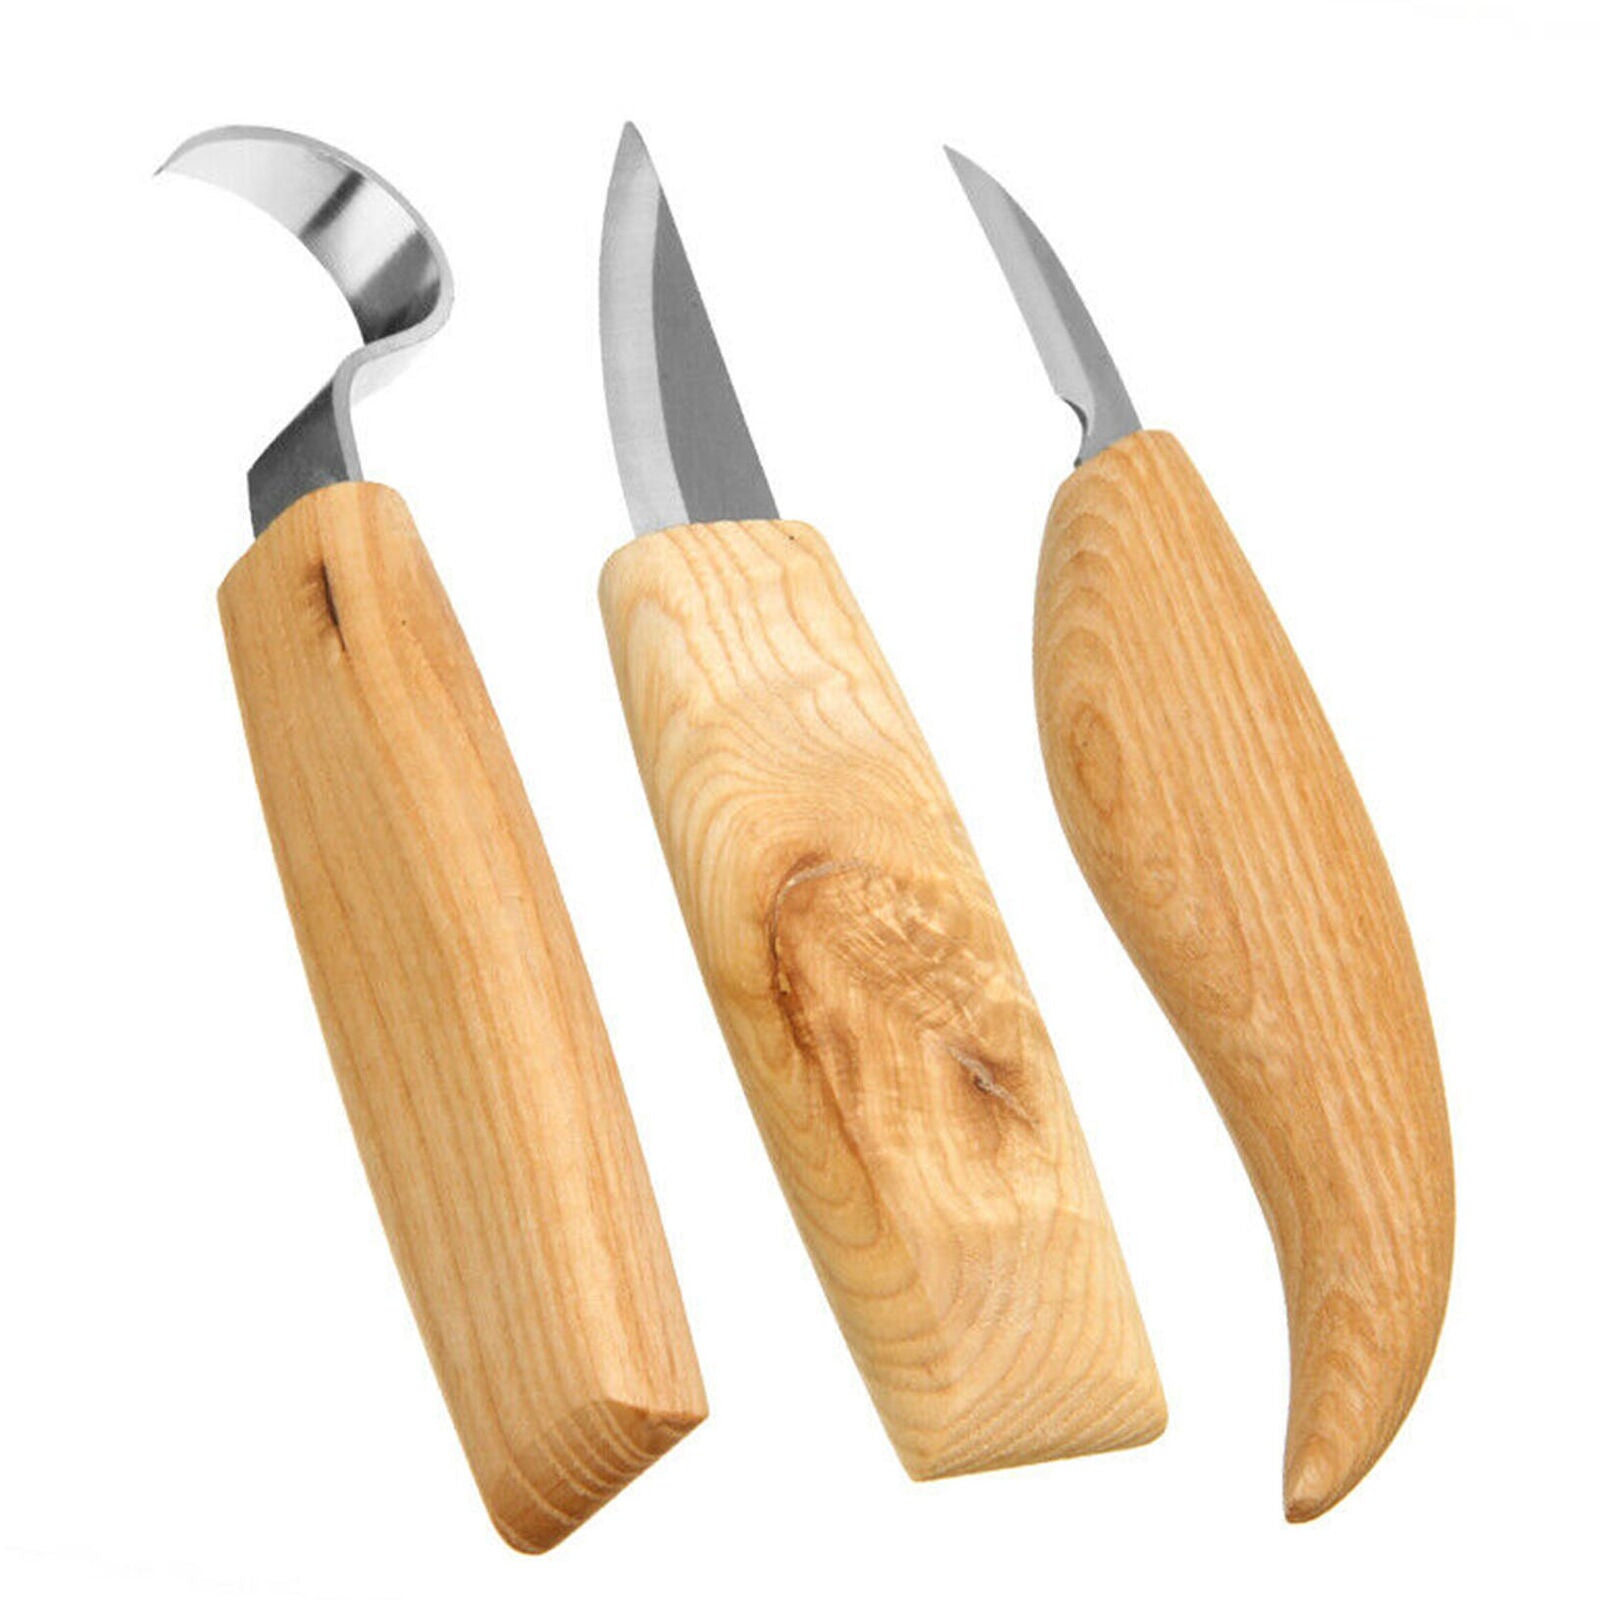 Wood Carving DIY Set Chisel Woodworking Whittling Cutter Chip Hand Tools 3pcs